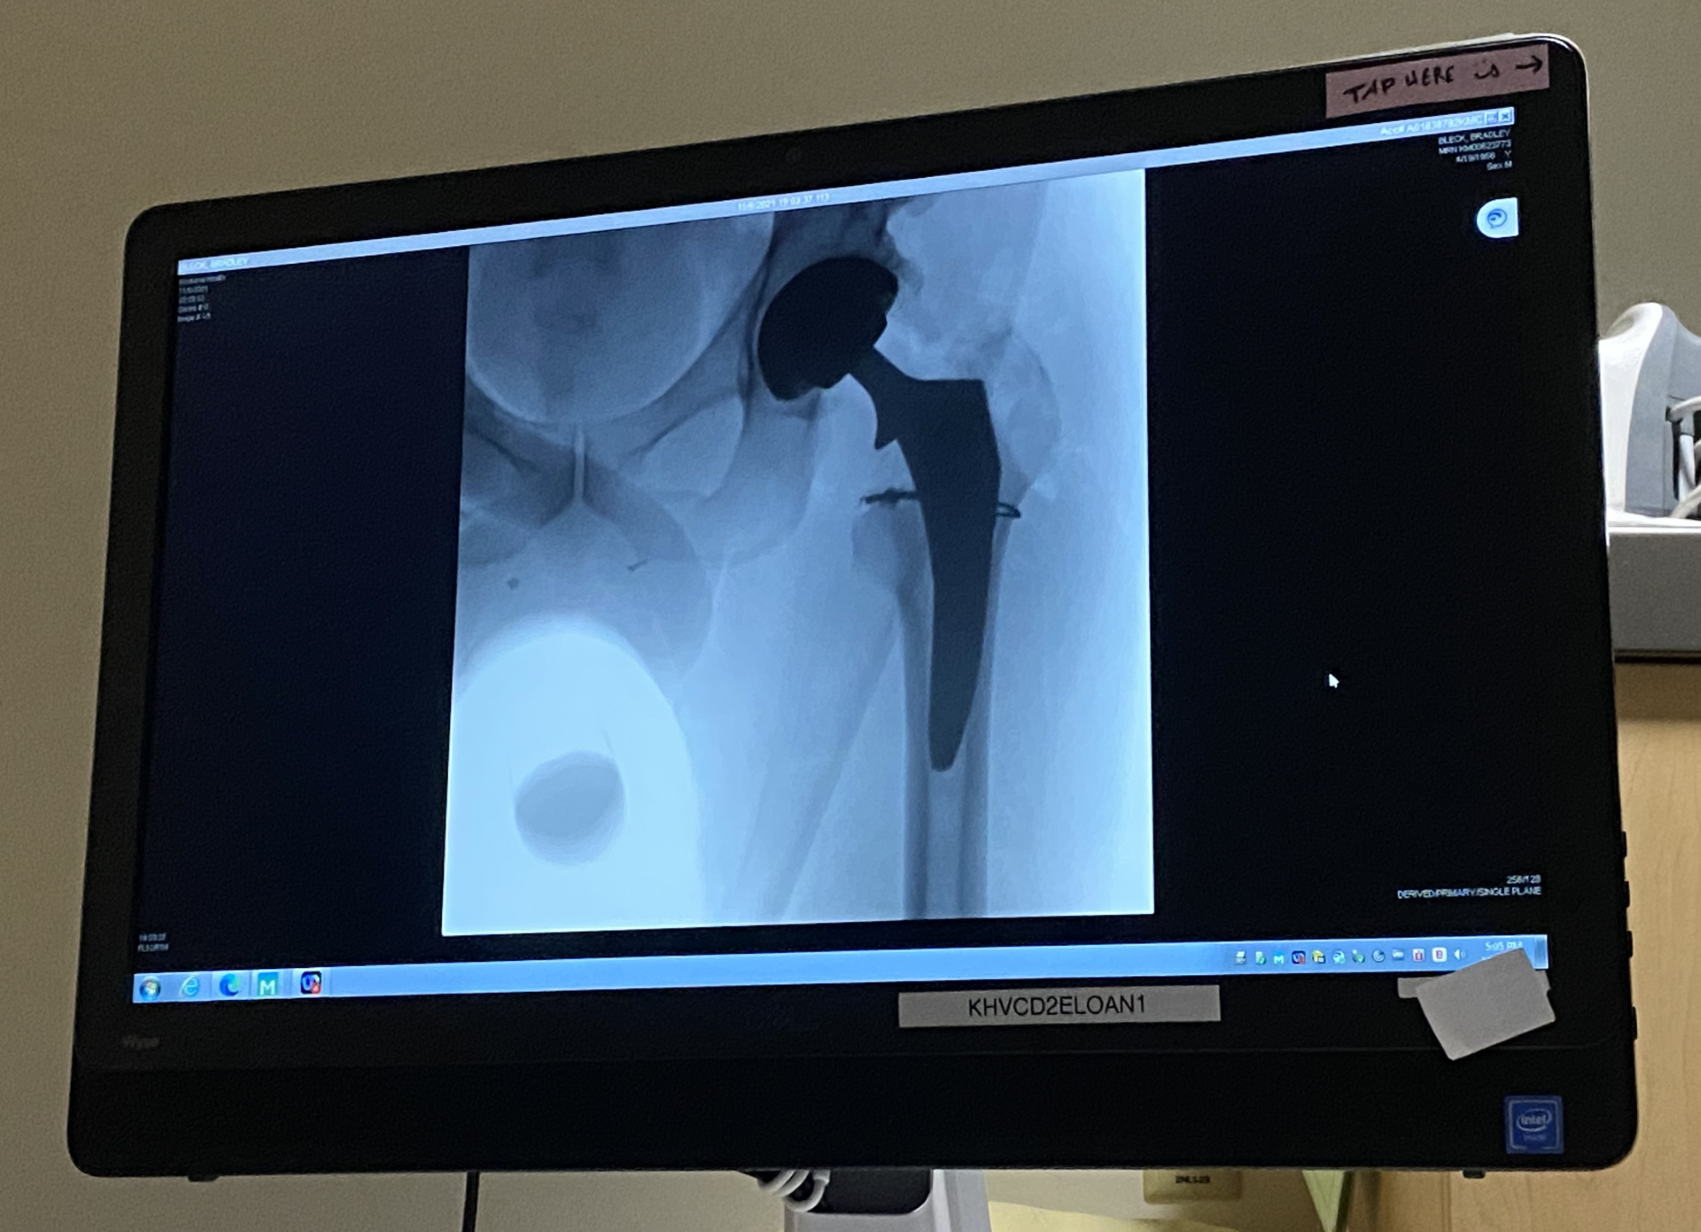 Recovering from hip replacement, X-ray of author's bionic hip - radiology image.